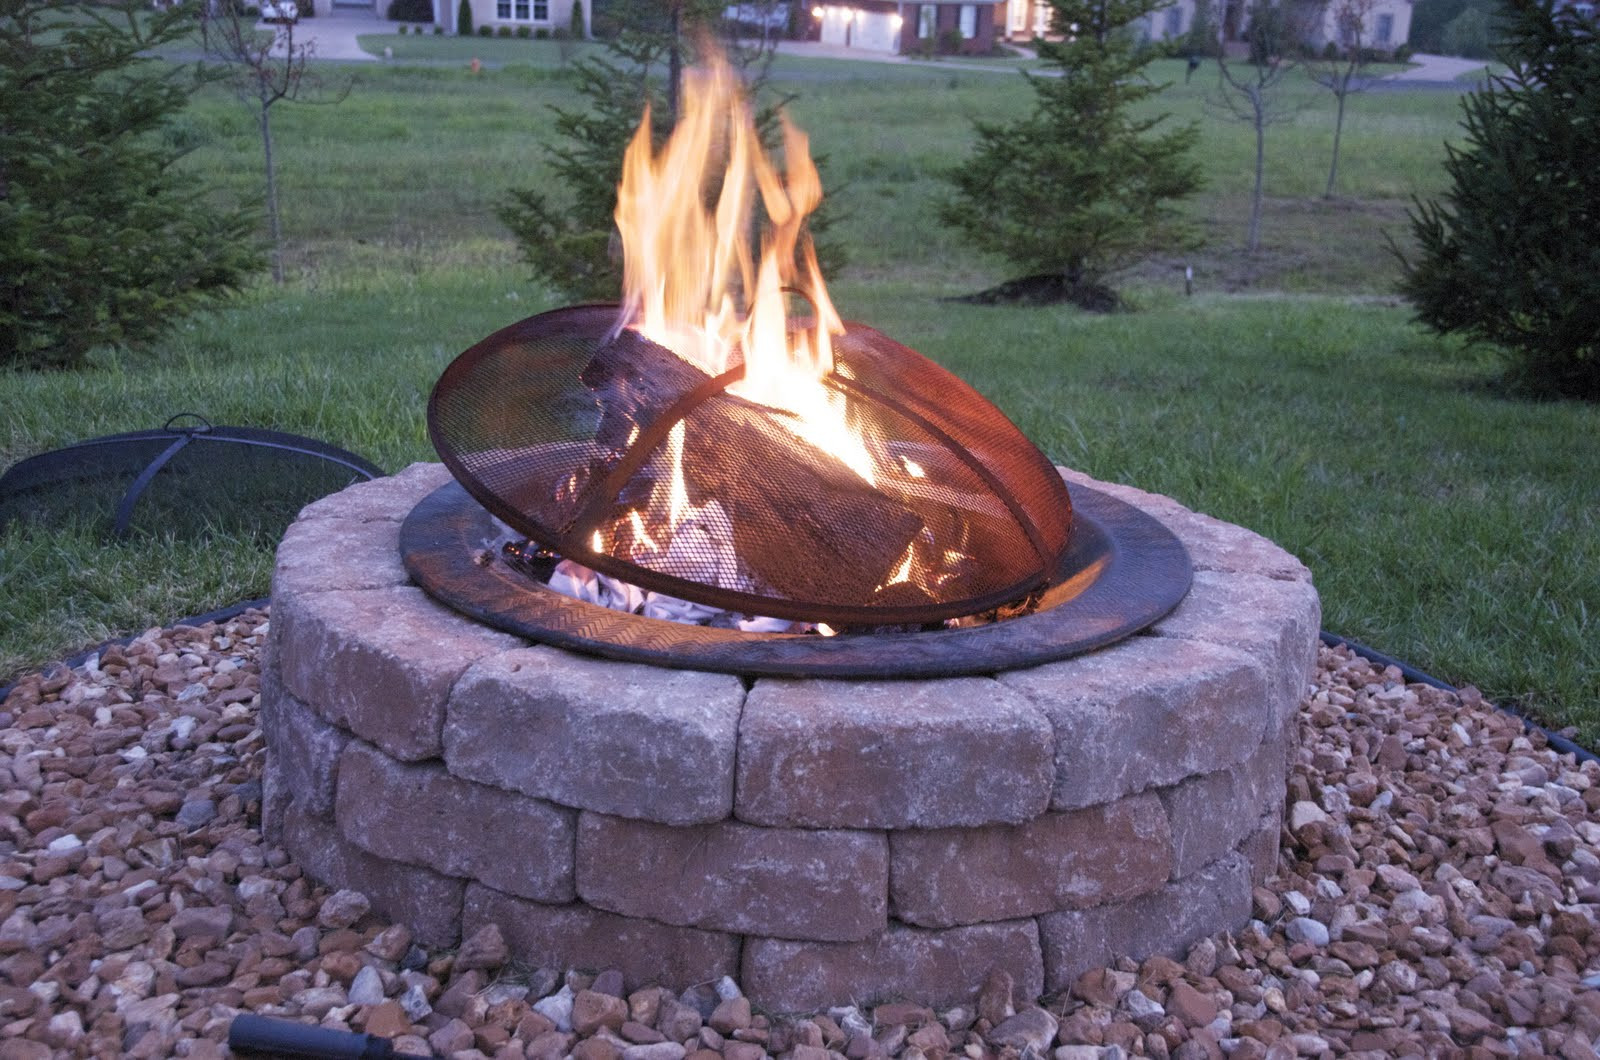 Build Your Own Outdoor Firepit
 How to build an outdoor firepit The Polkadot Chair